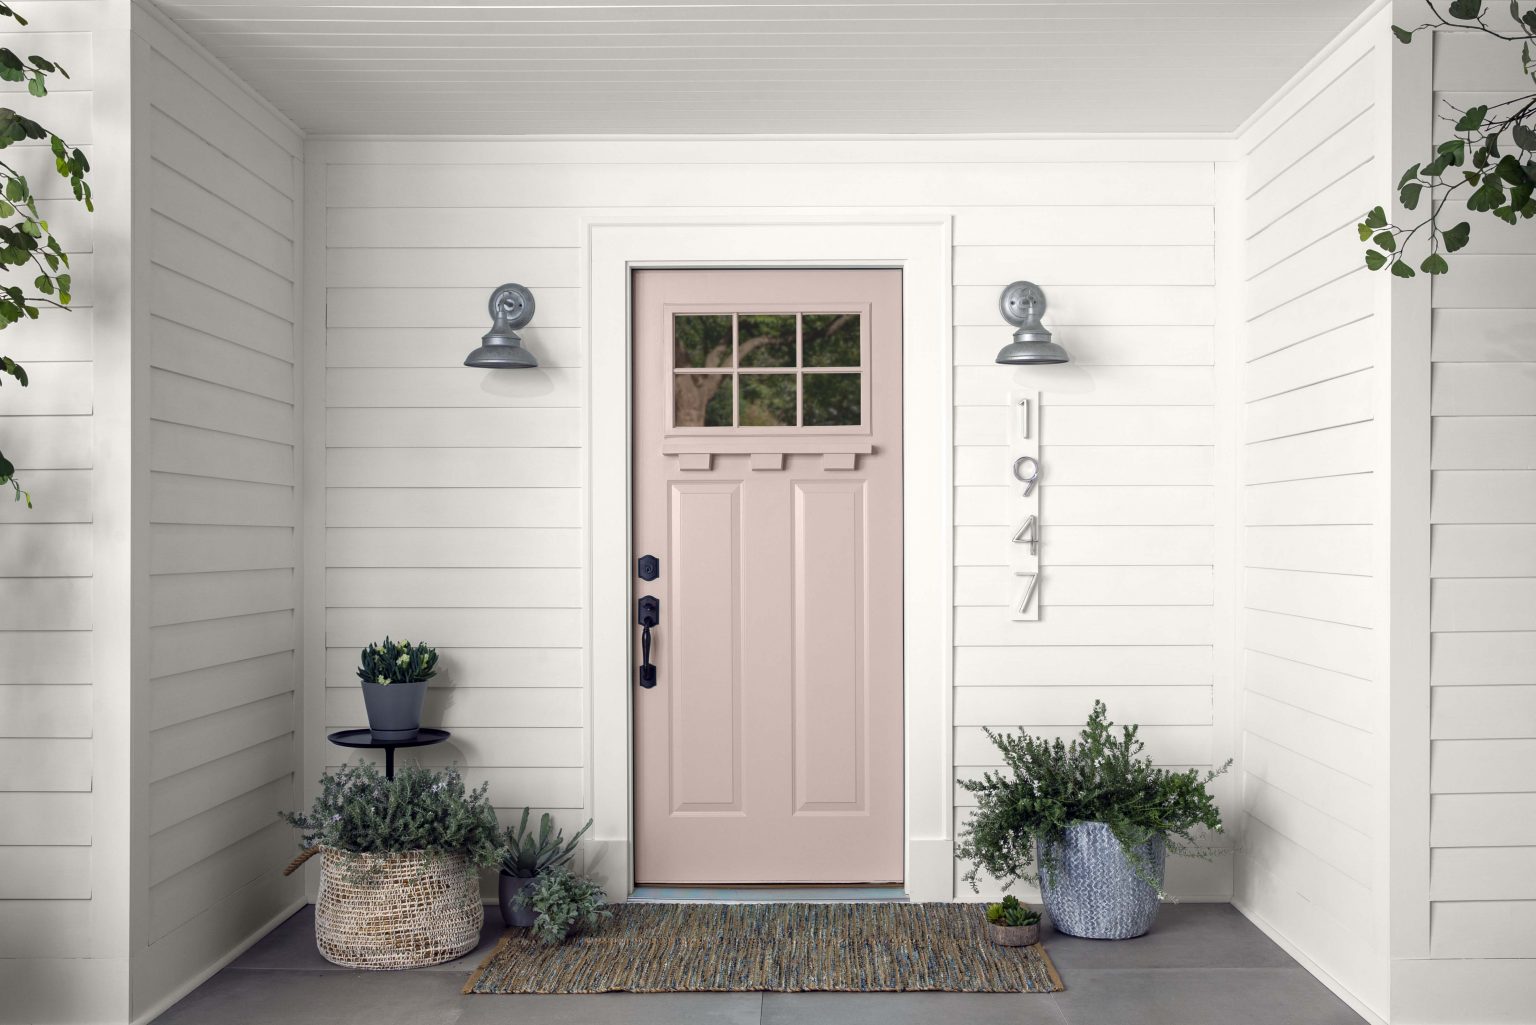 A closeup of an exterior porch, with walls painted in white and the front door painted in a neutral light pink colour